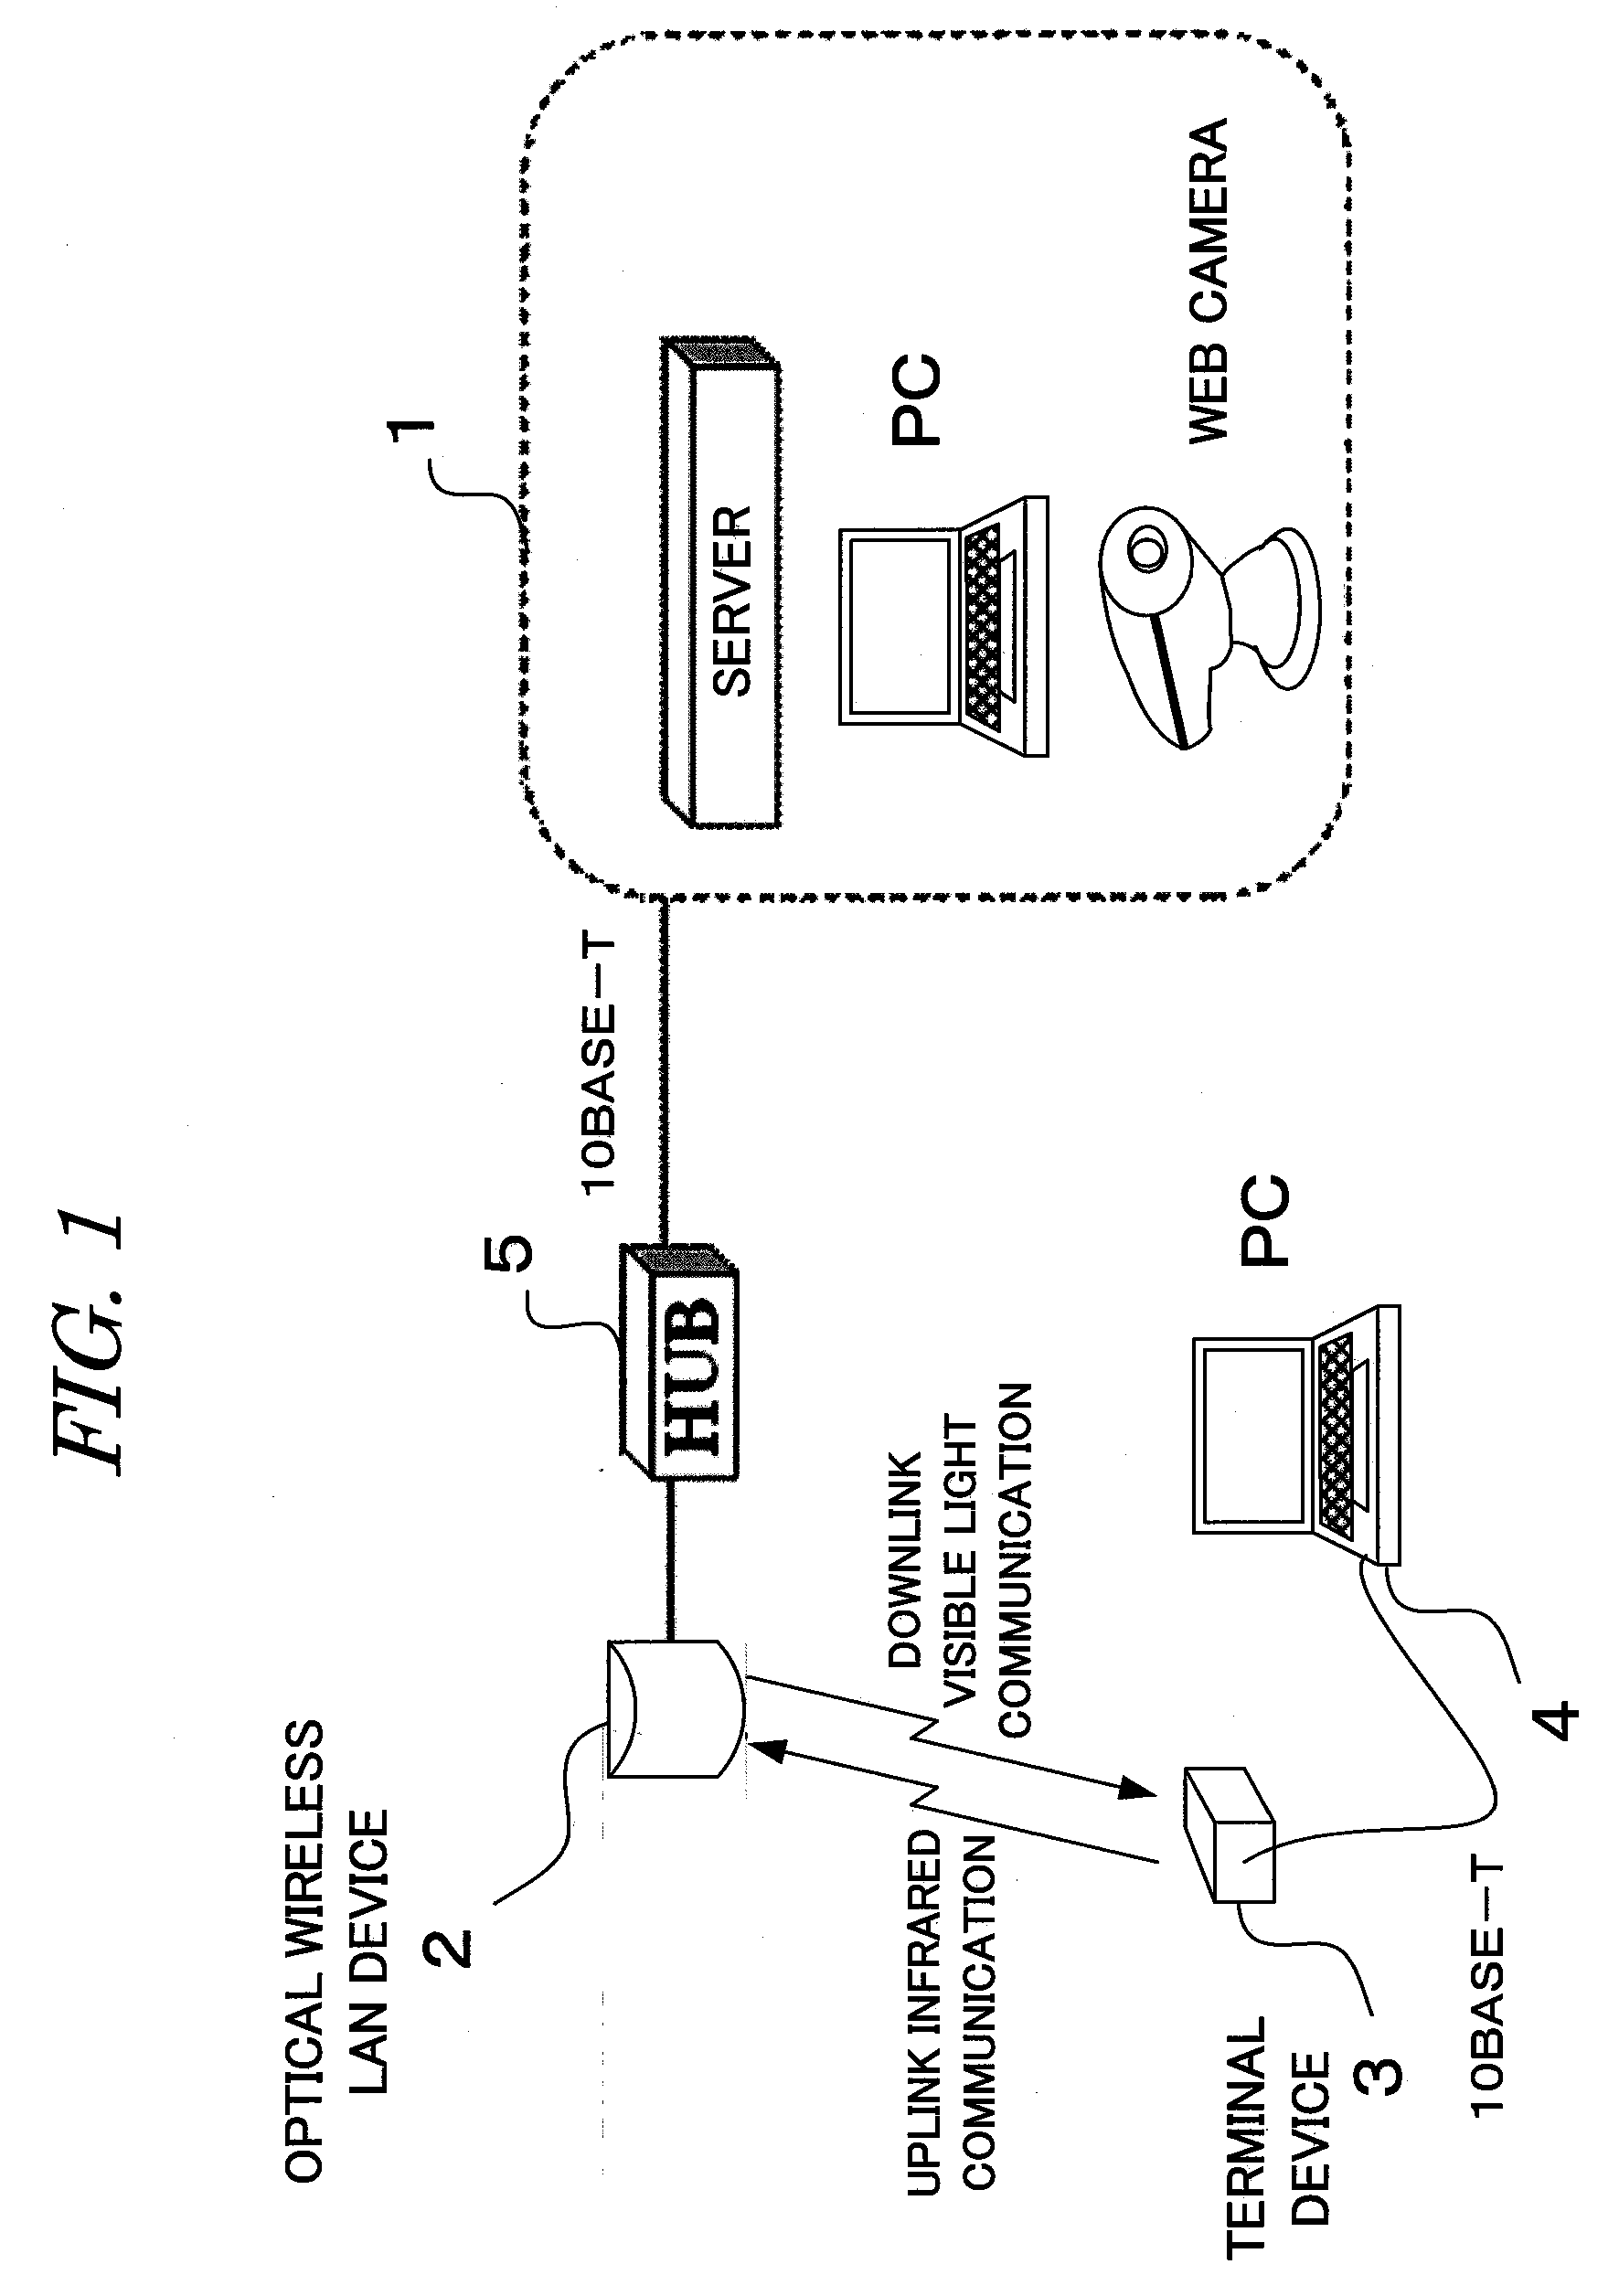 Visible light communication system and optical wireless LAN device